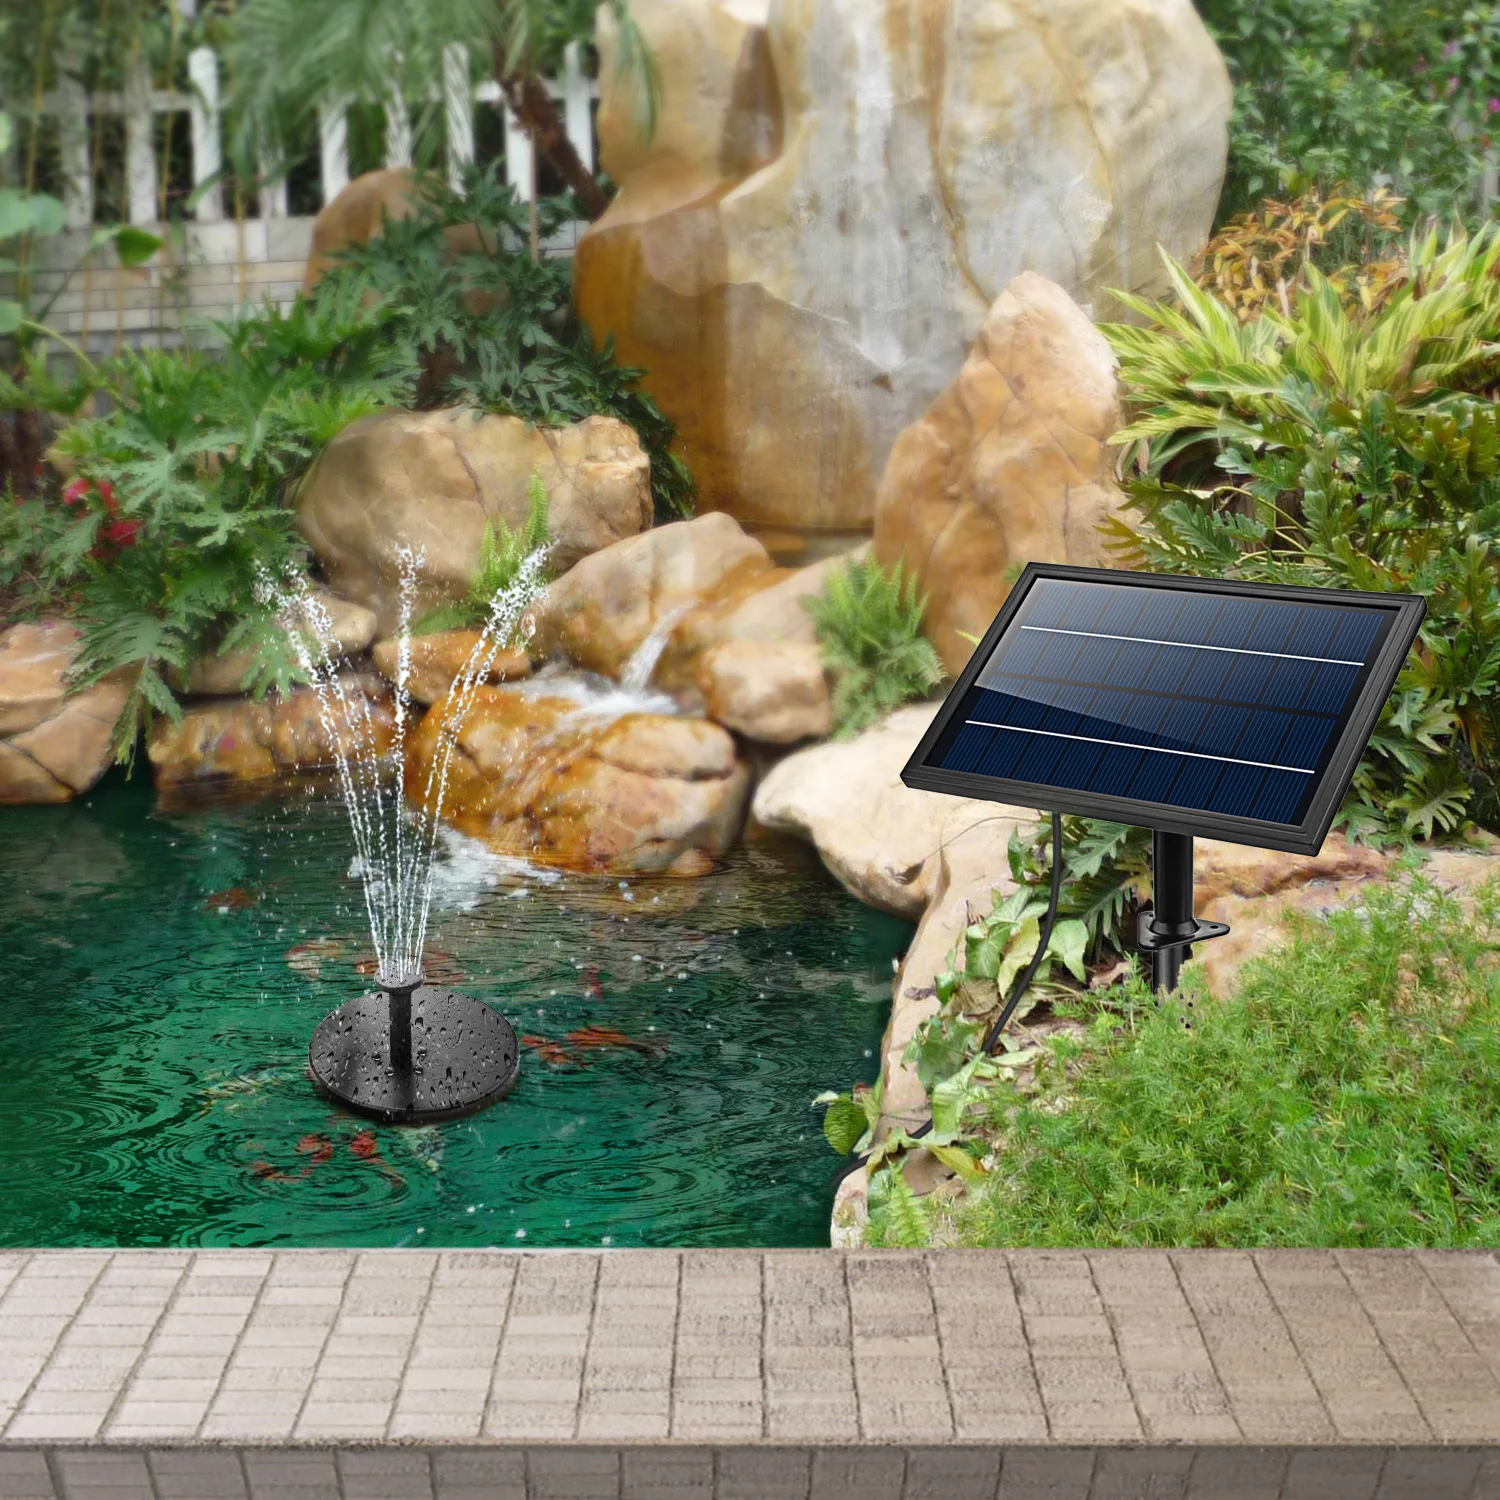 NEW 10W LED Solar Water Feature Pump Kit Power Fountain/Pond/Pool 